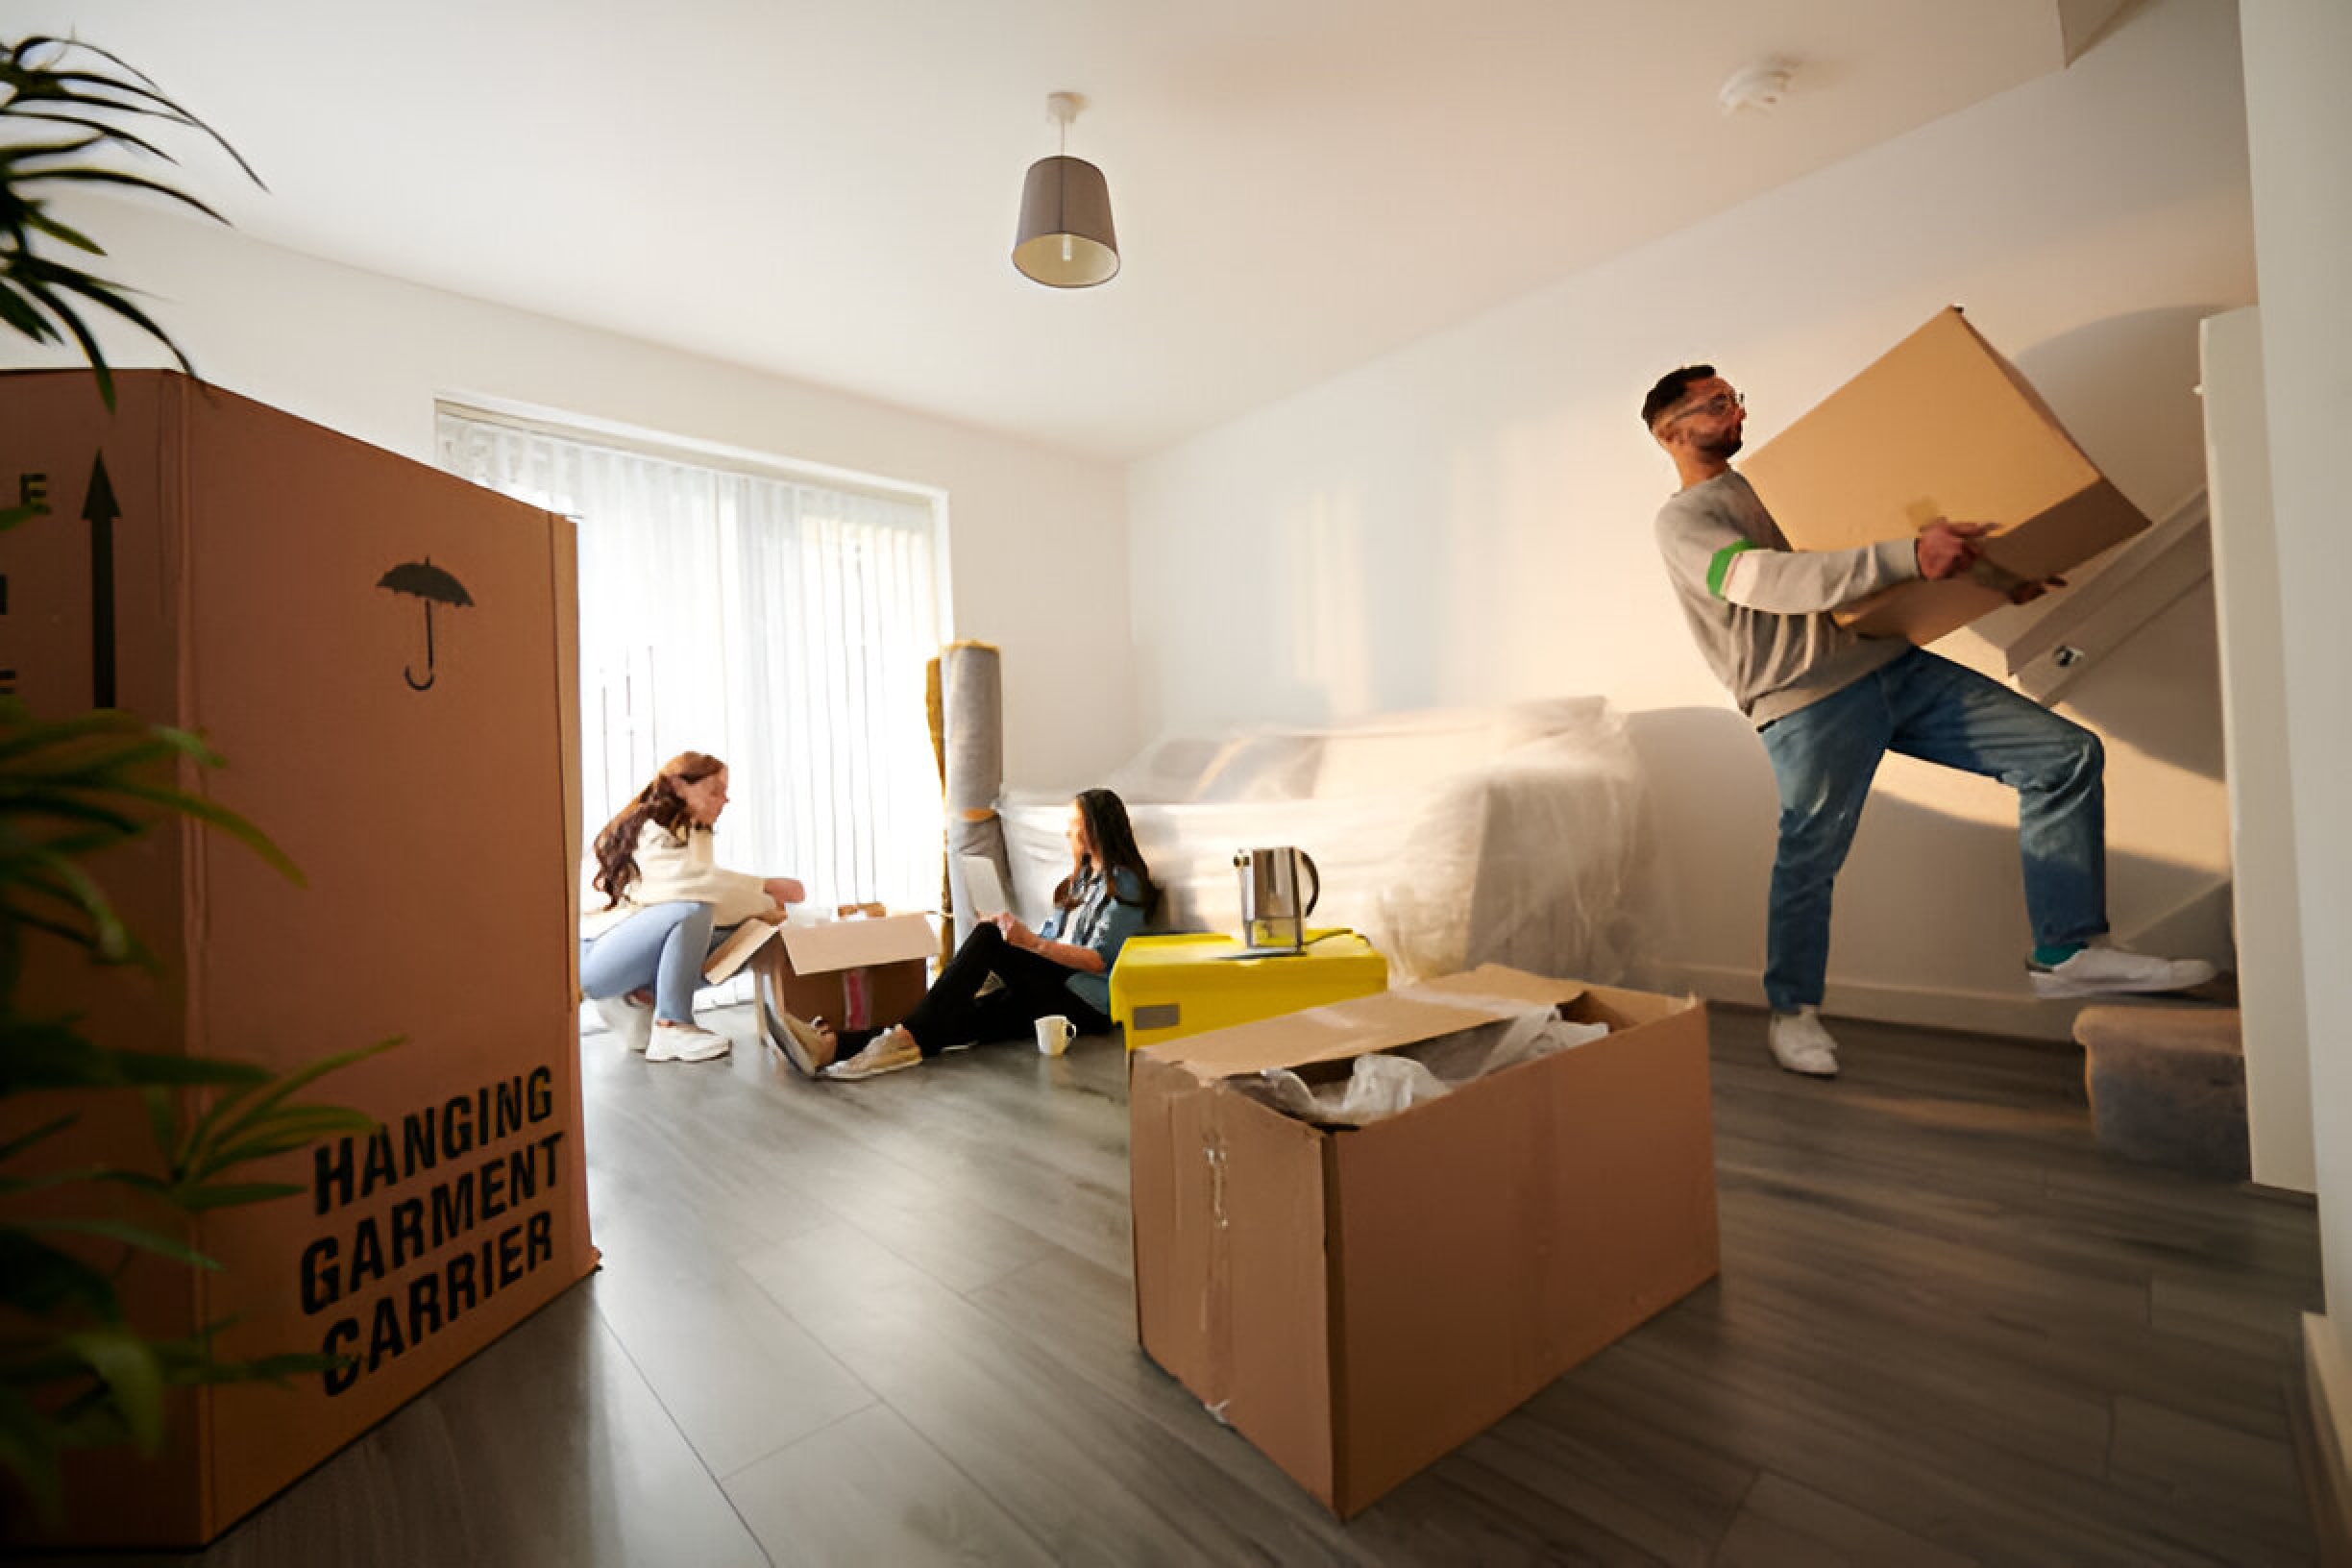 household movers